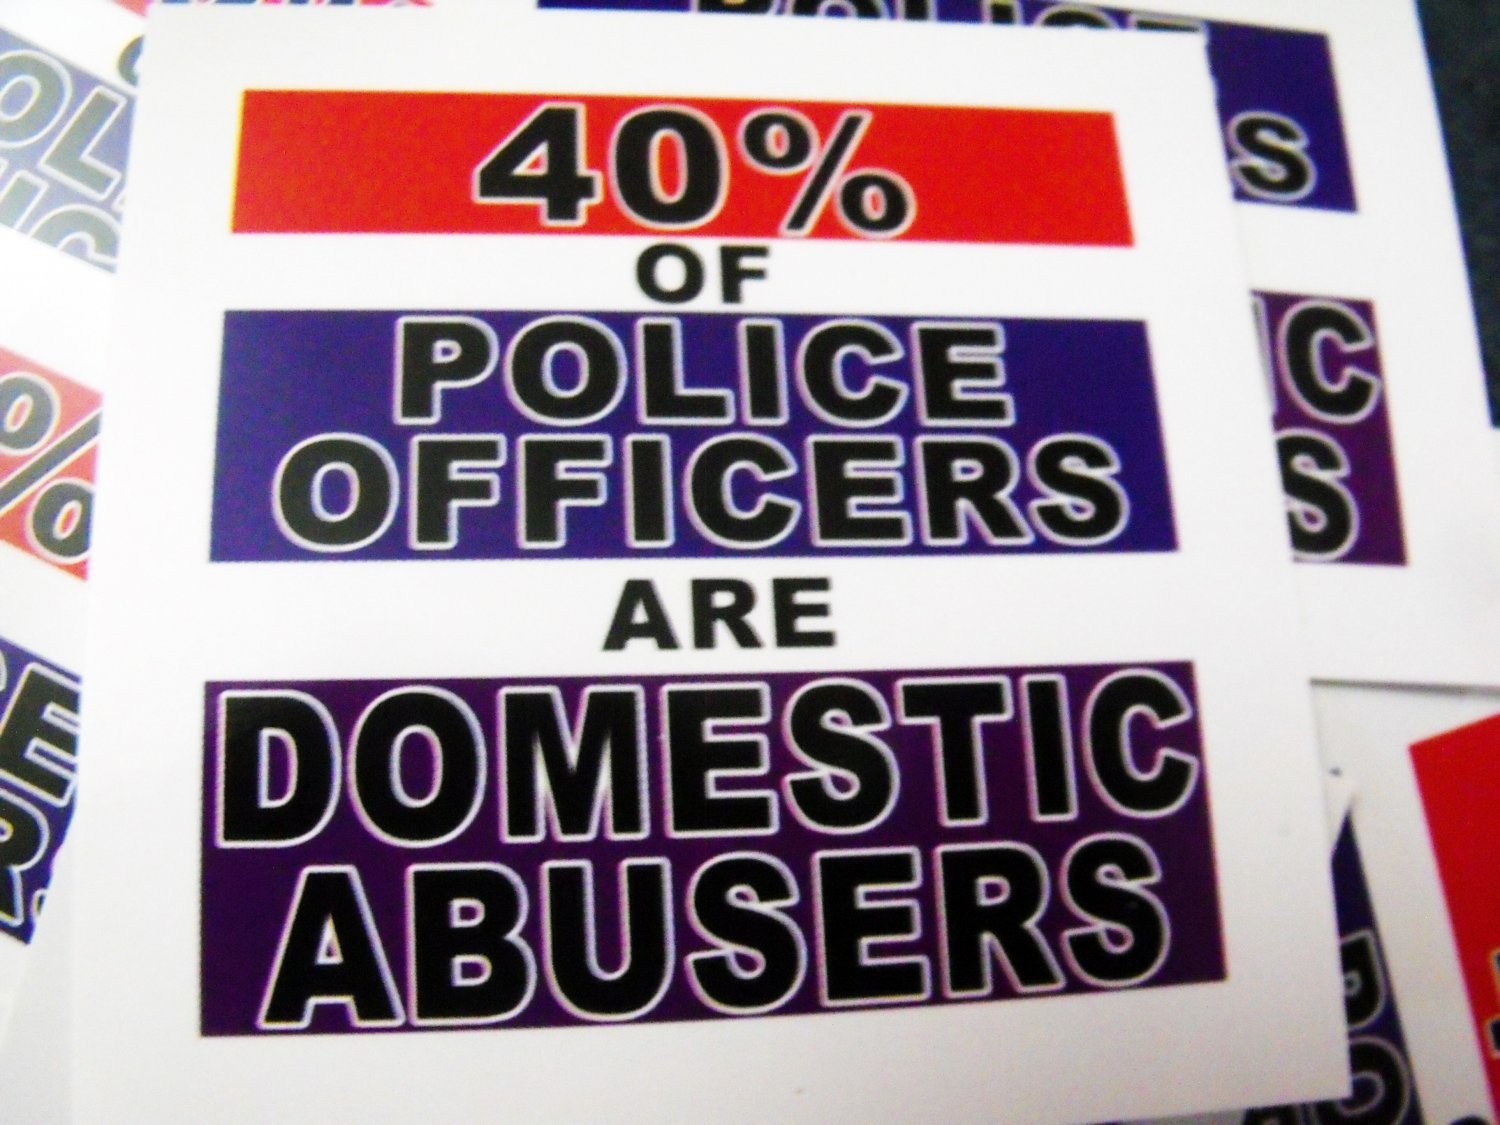 25 40% OF POLICE OFFICERS ARE DOMESTIC ABUSERS 2.5" x 2.5"  stickers